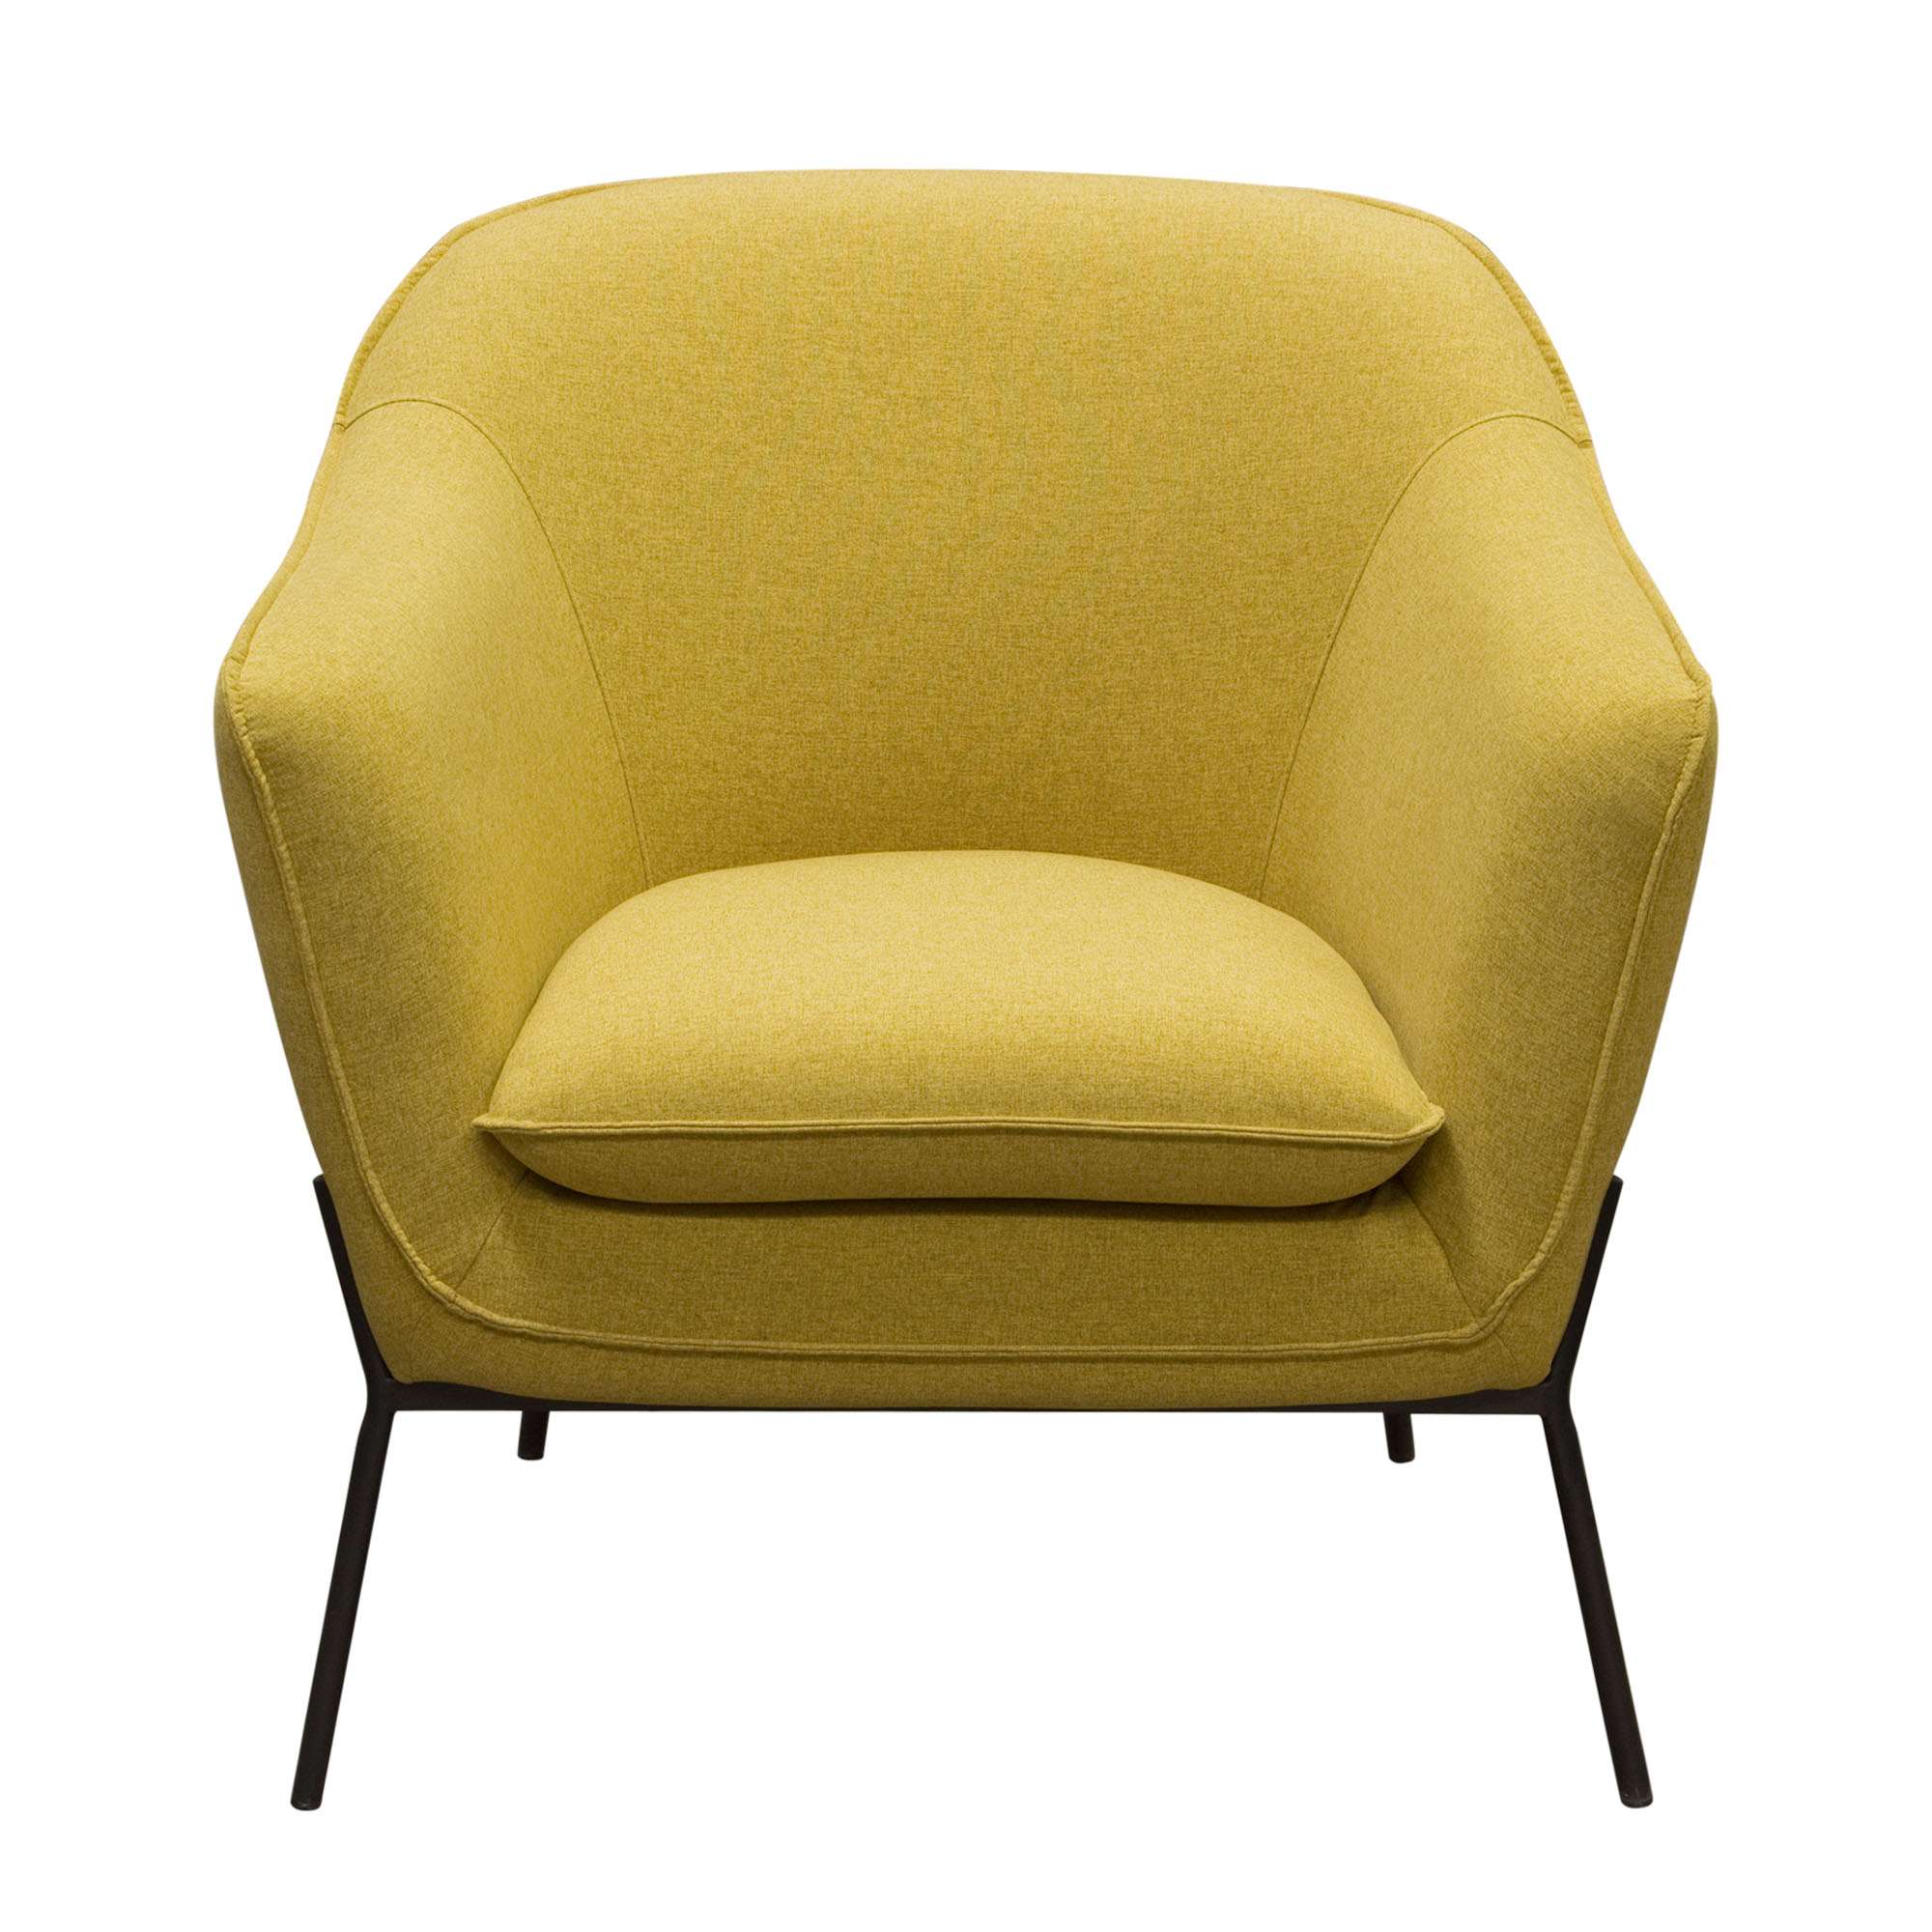 Status Accent Chair in Yellow Fabric by Diamond Sofa - Decorian Group